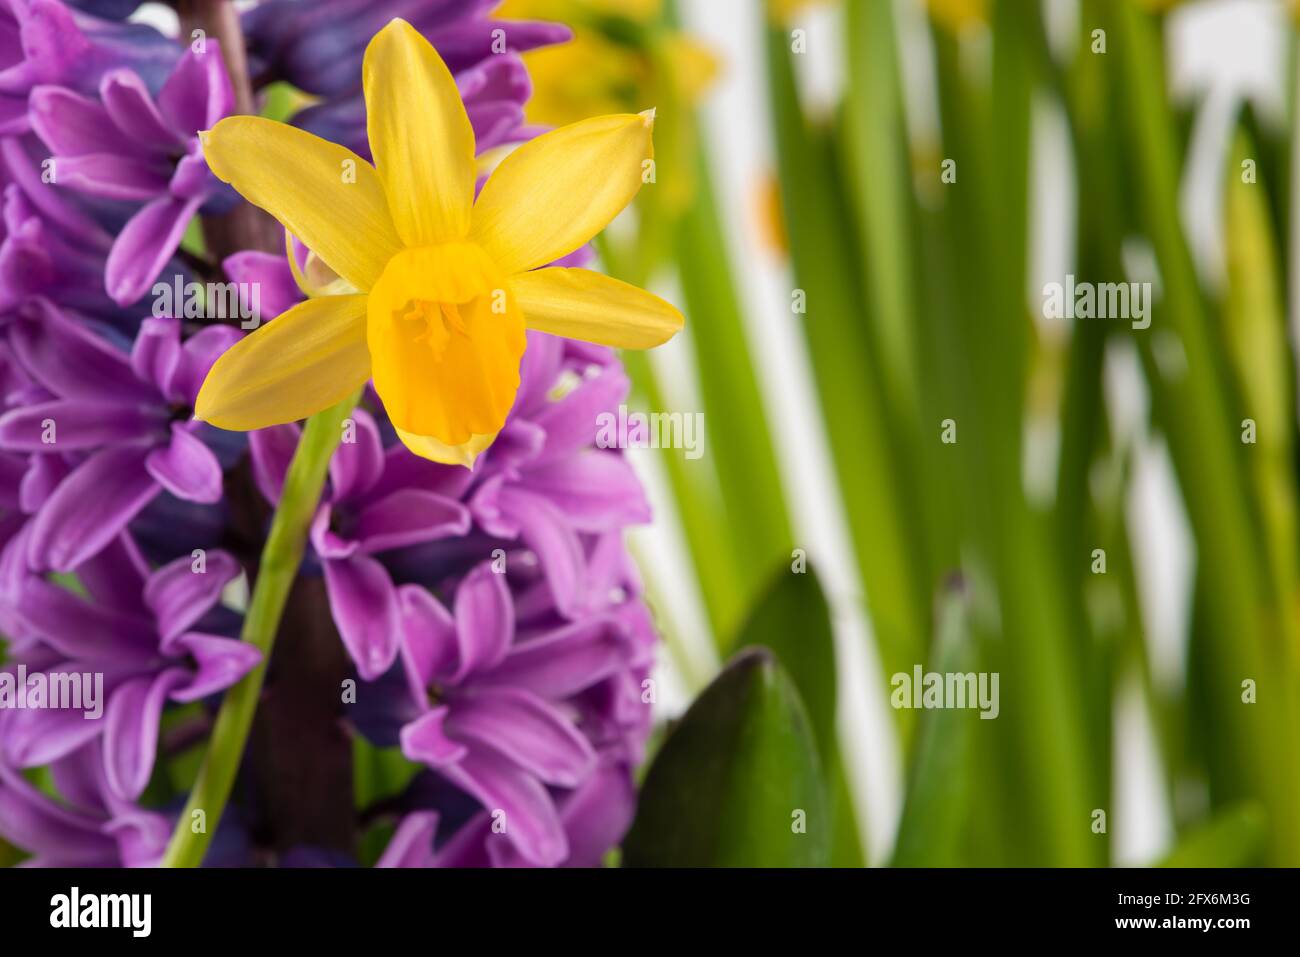 Spring daffodil and hyacinth flower in spring garden close-up Stock Photo